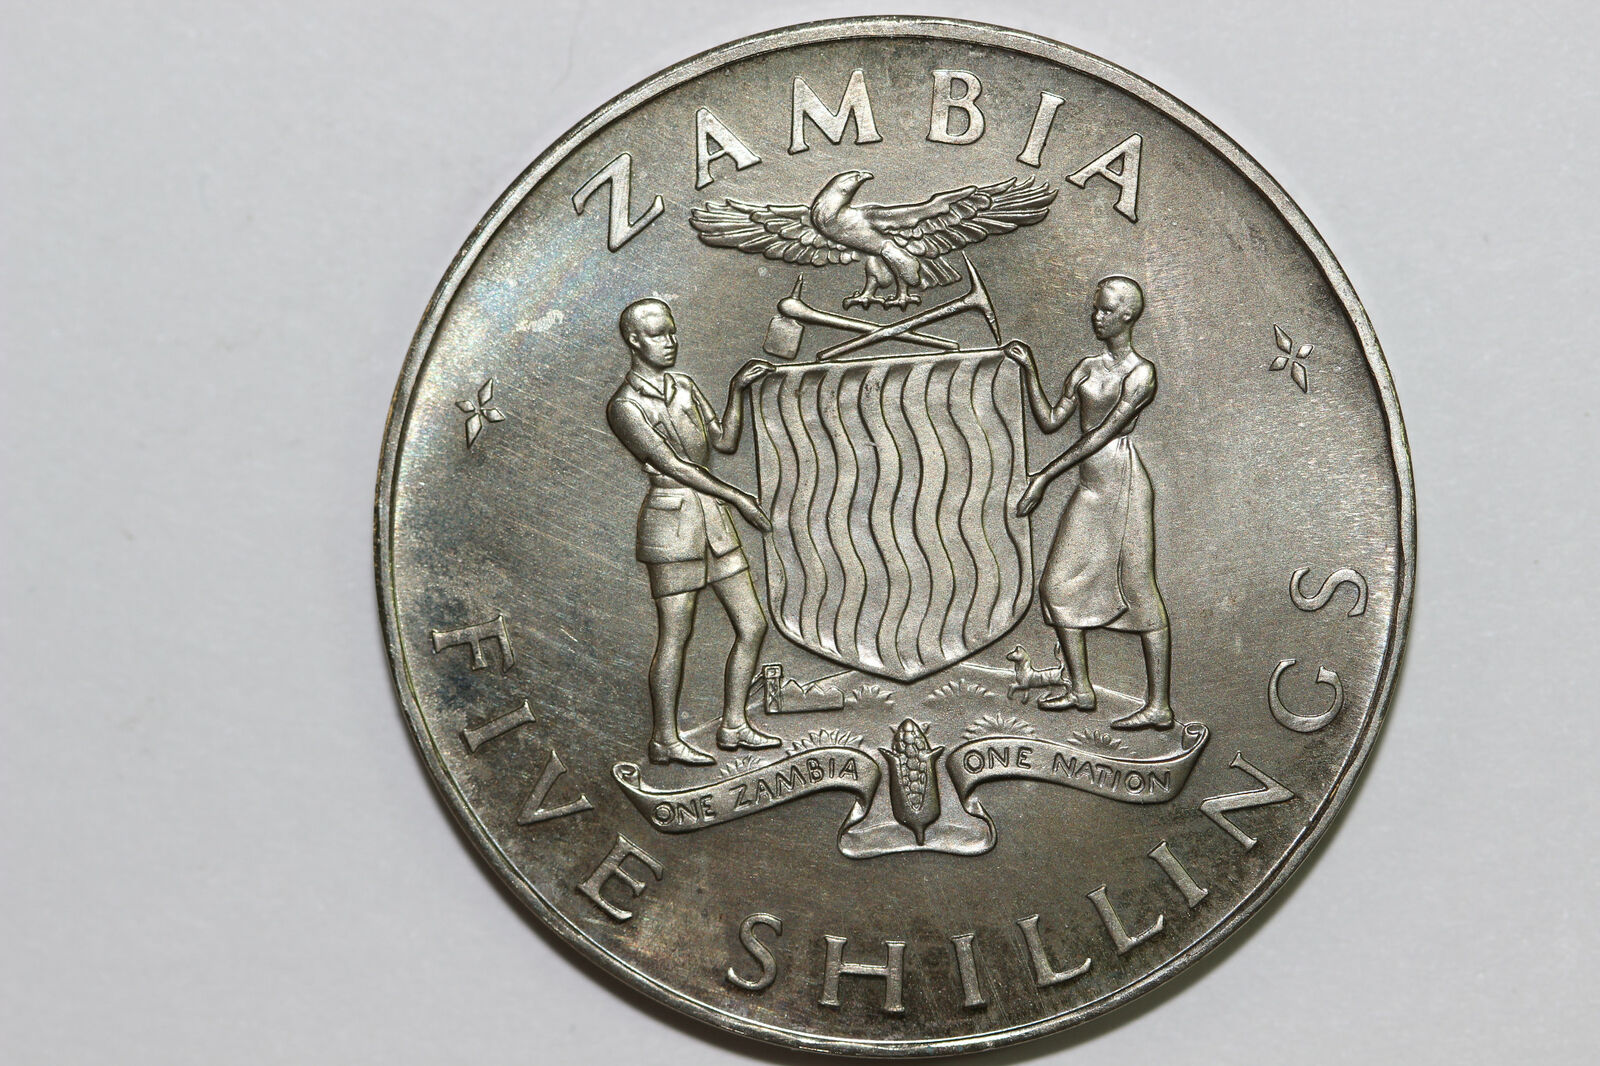 1965 Zambia 5 Shillings Cu/ni Independence Coin Grades Proof (num6949)